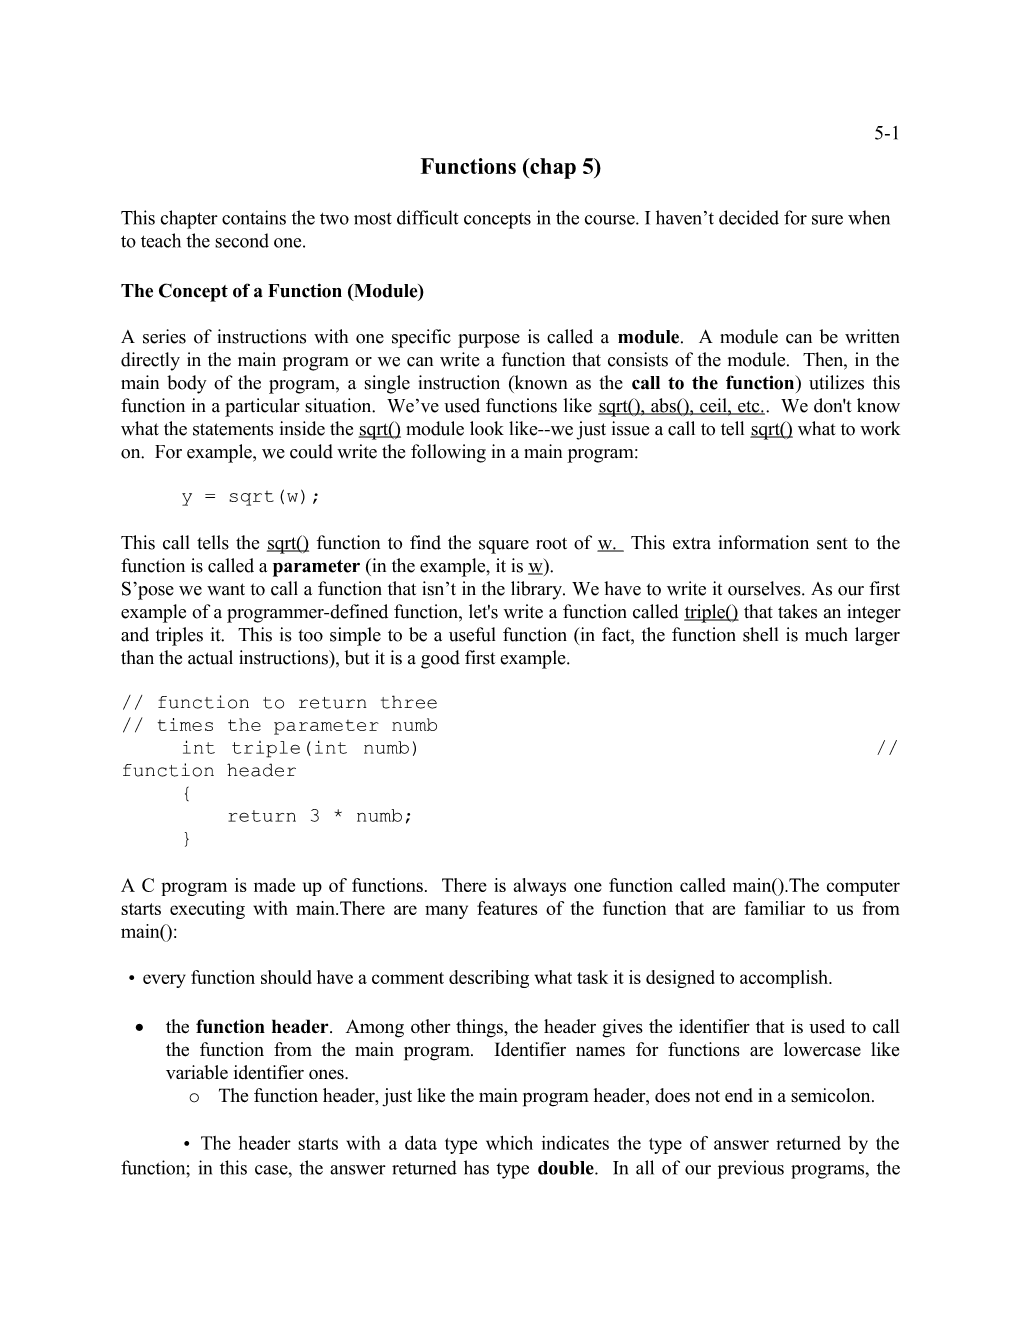 Functions (Chap 5)